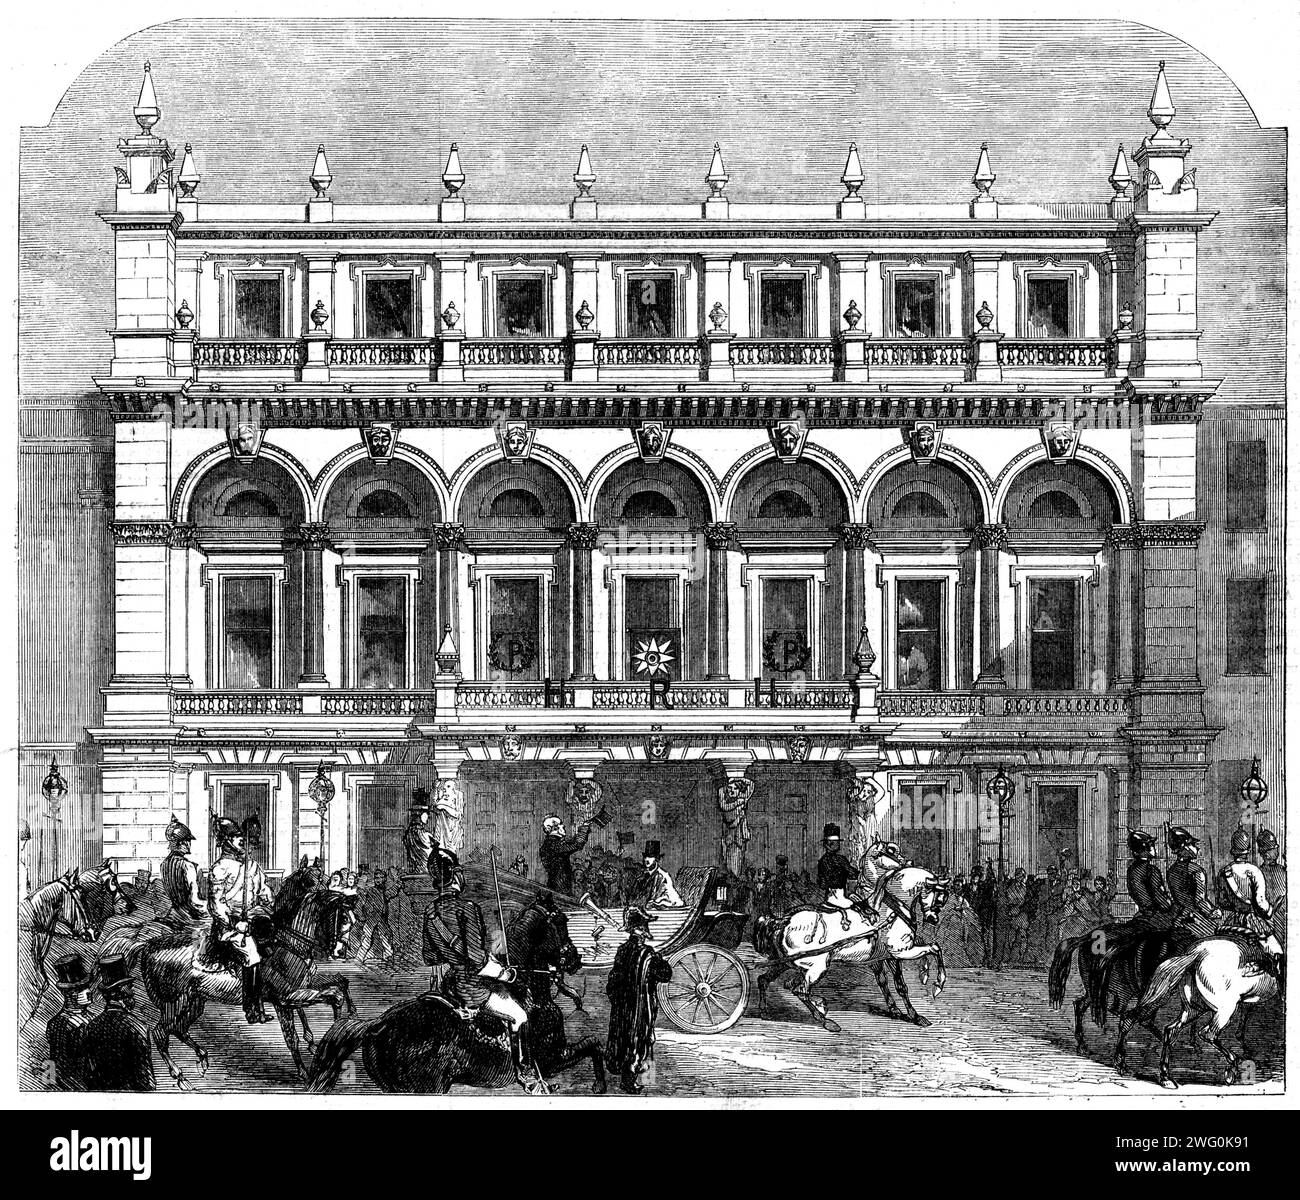 The opening of the Hartley Institution at Southampton by Lord Palmerston: arrival of His Lordship at the Institution, 1862. 'A large body of the inhabitants...assembled...to welcome his Lordship [the British prime minister], who was greeted with the warmest enthusiasm. The approach of the carriage of the noble Lord was the signal for vociferous cheering, while the band of the Coldstream Guards, of her Majesty's ship Boscawen, of the Volunteer Artillery Corps, of the Foresters, Royal Marines, Odd Fellows, and Hants Yeomanry, struck up a lively strain...The bells of the different churches were a Stock Photo